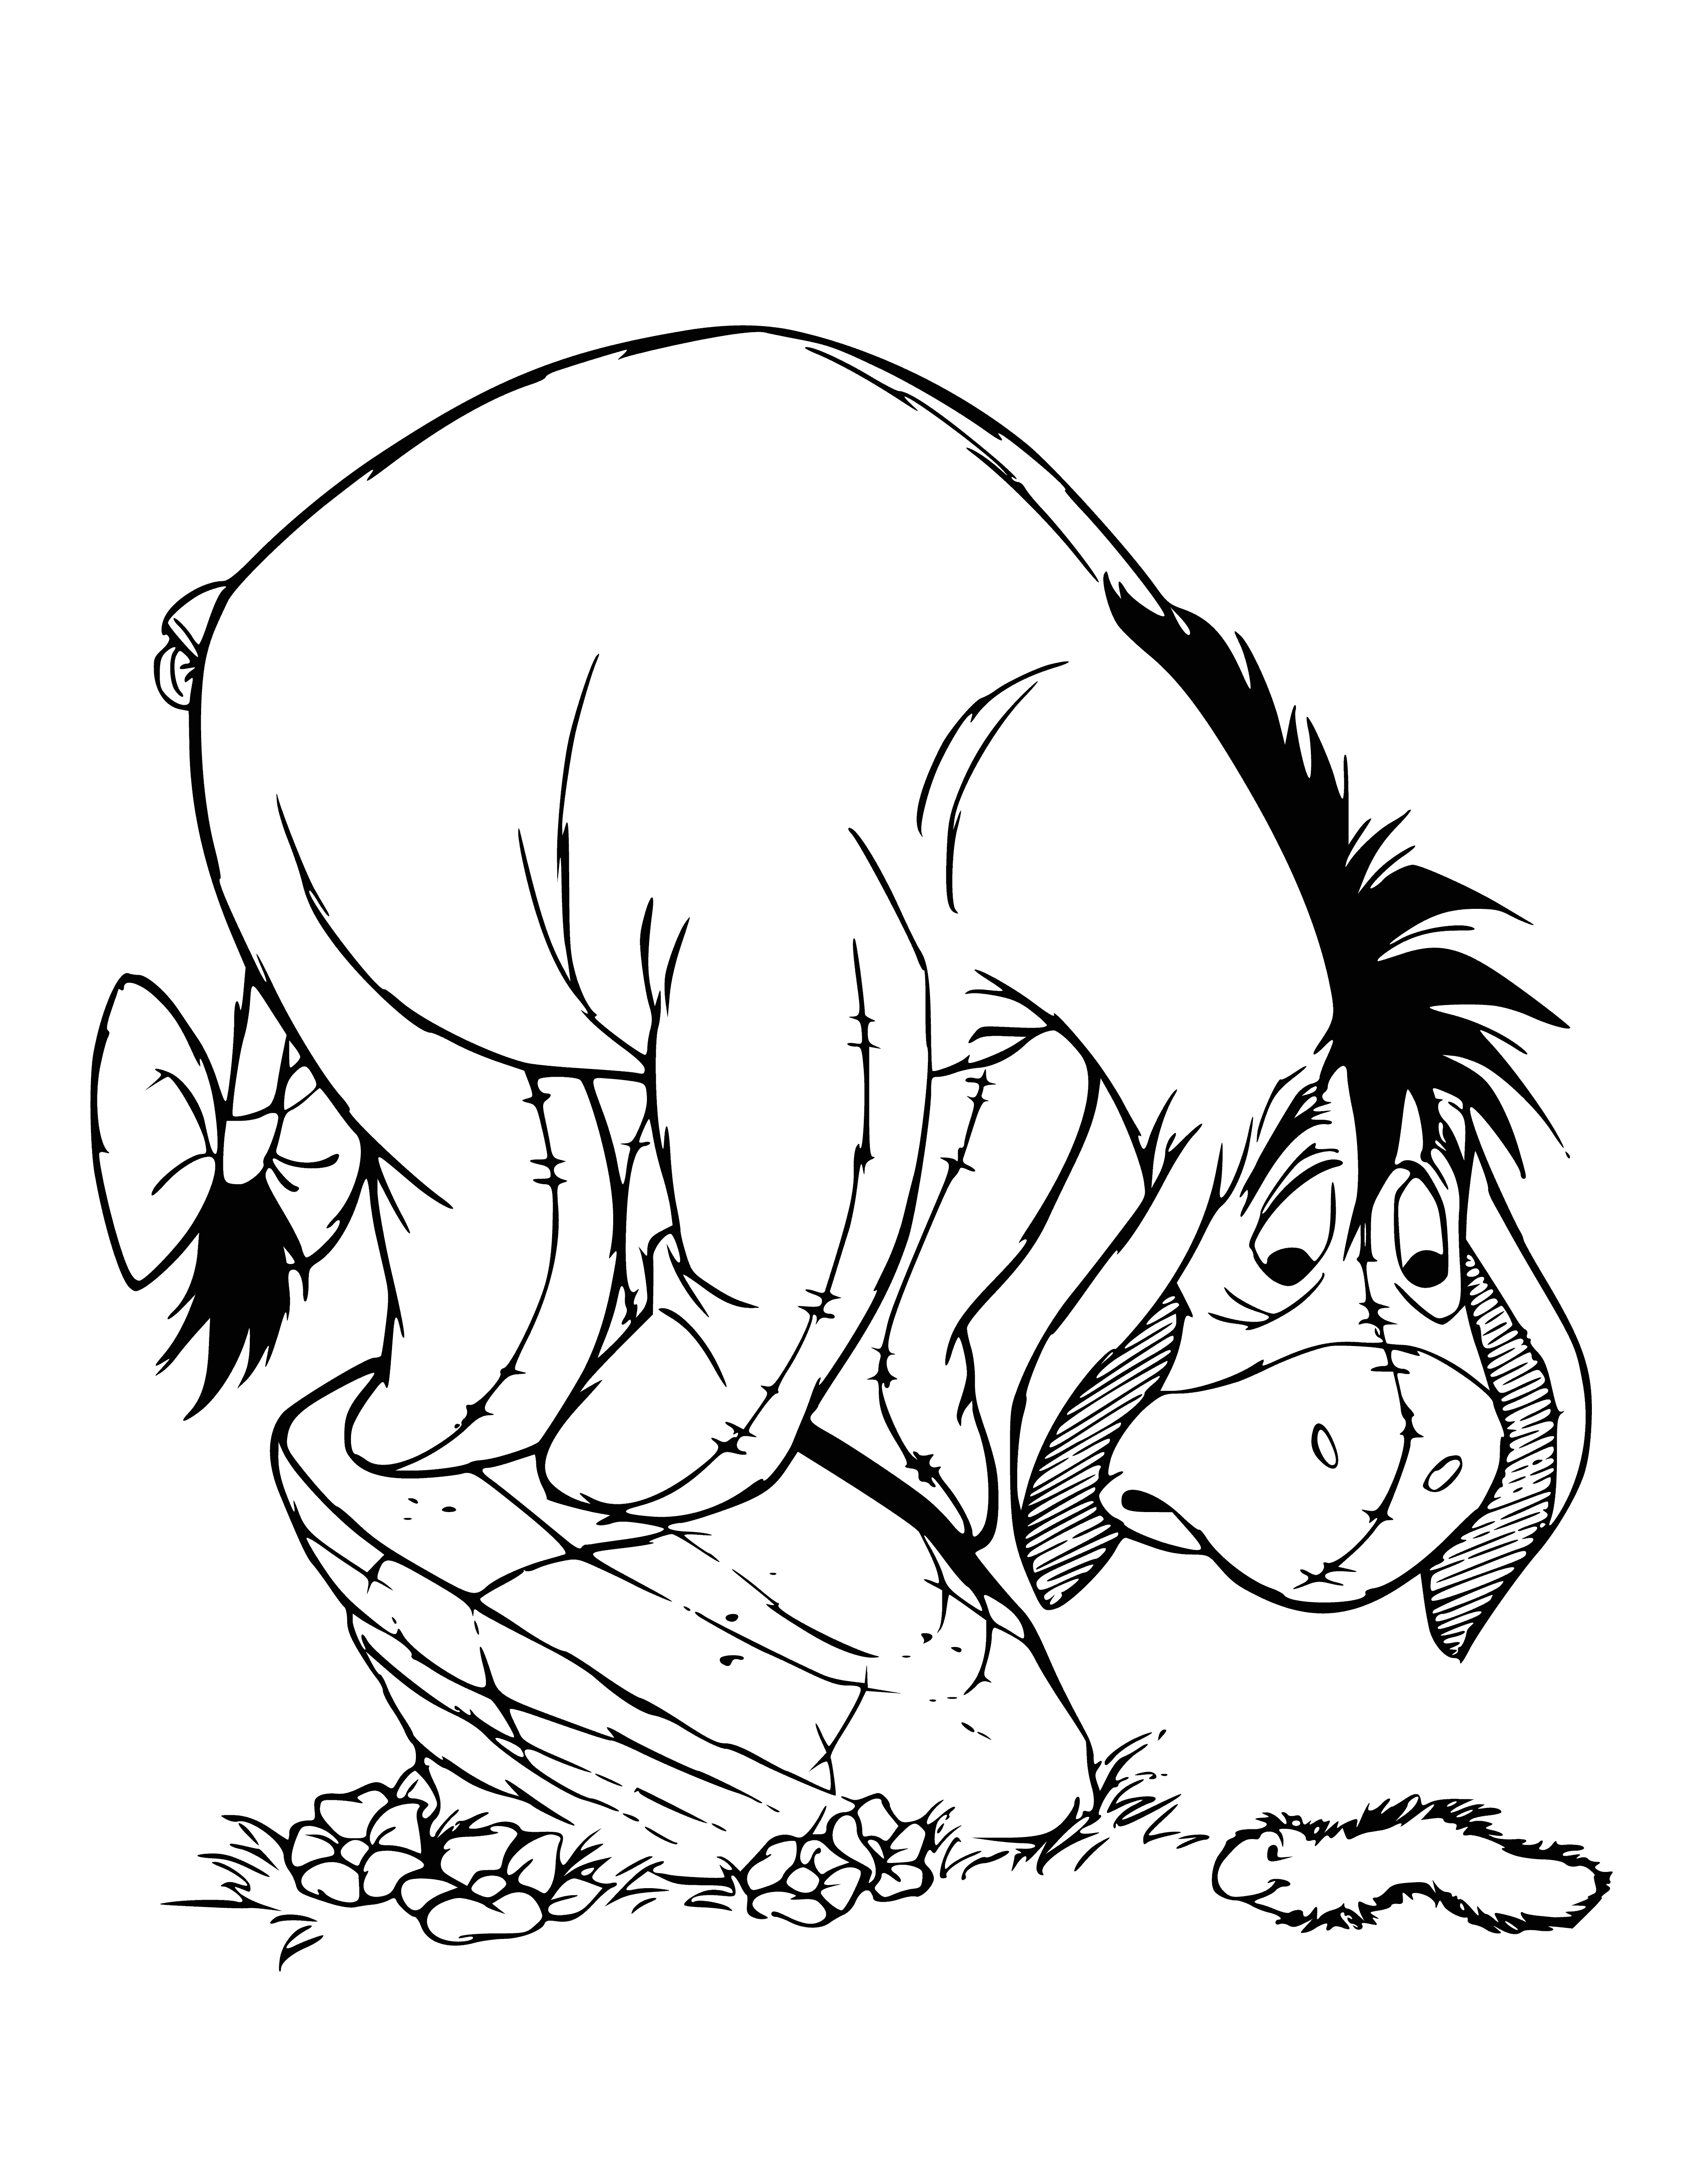 Donkey and caterpillar coloring page